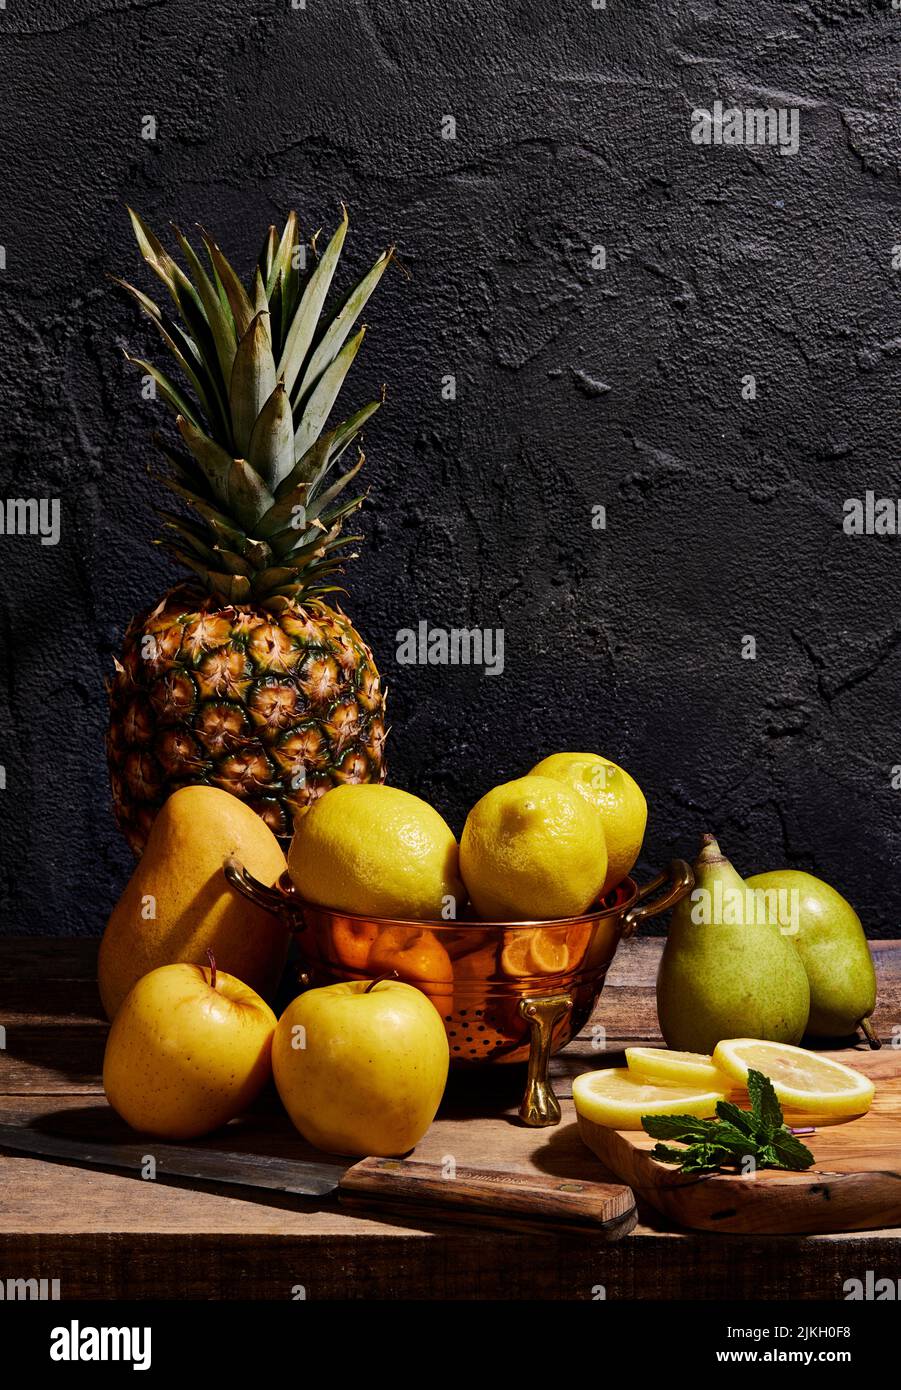 A still life, closeup of various fruit, pears, pineapple, lemons, and apples on a wooden table Stock Photo